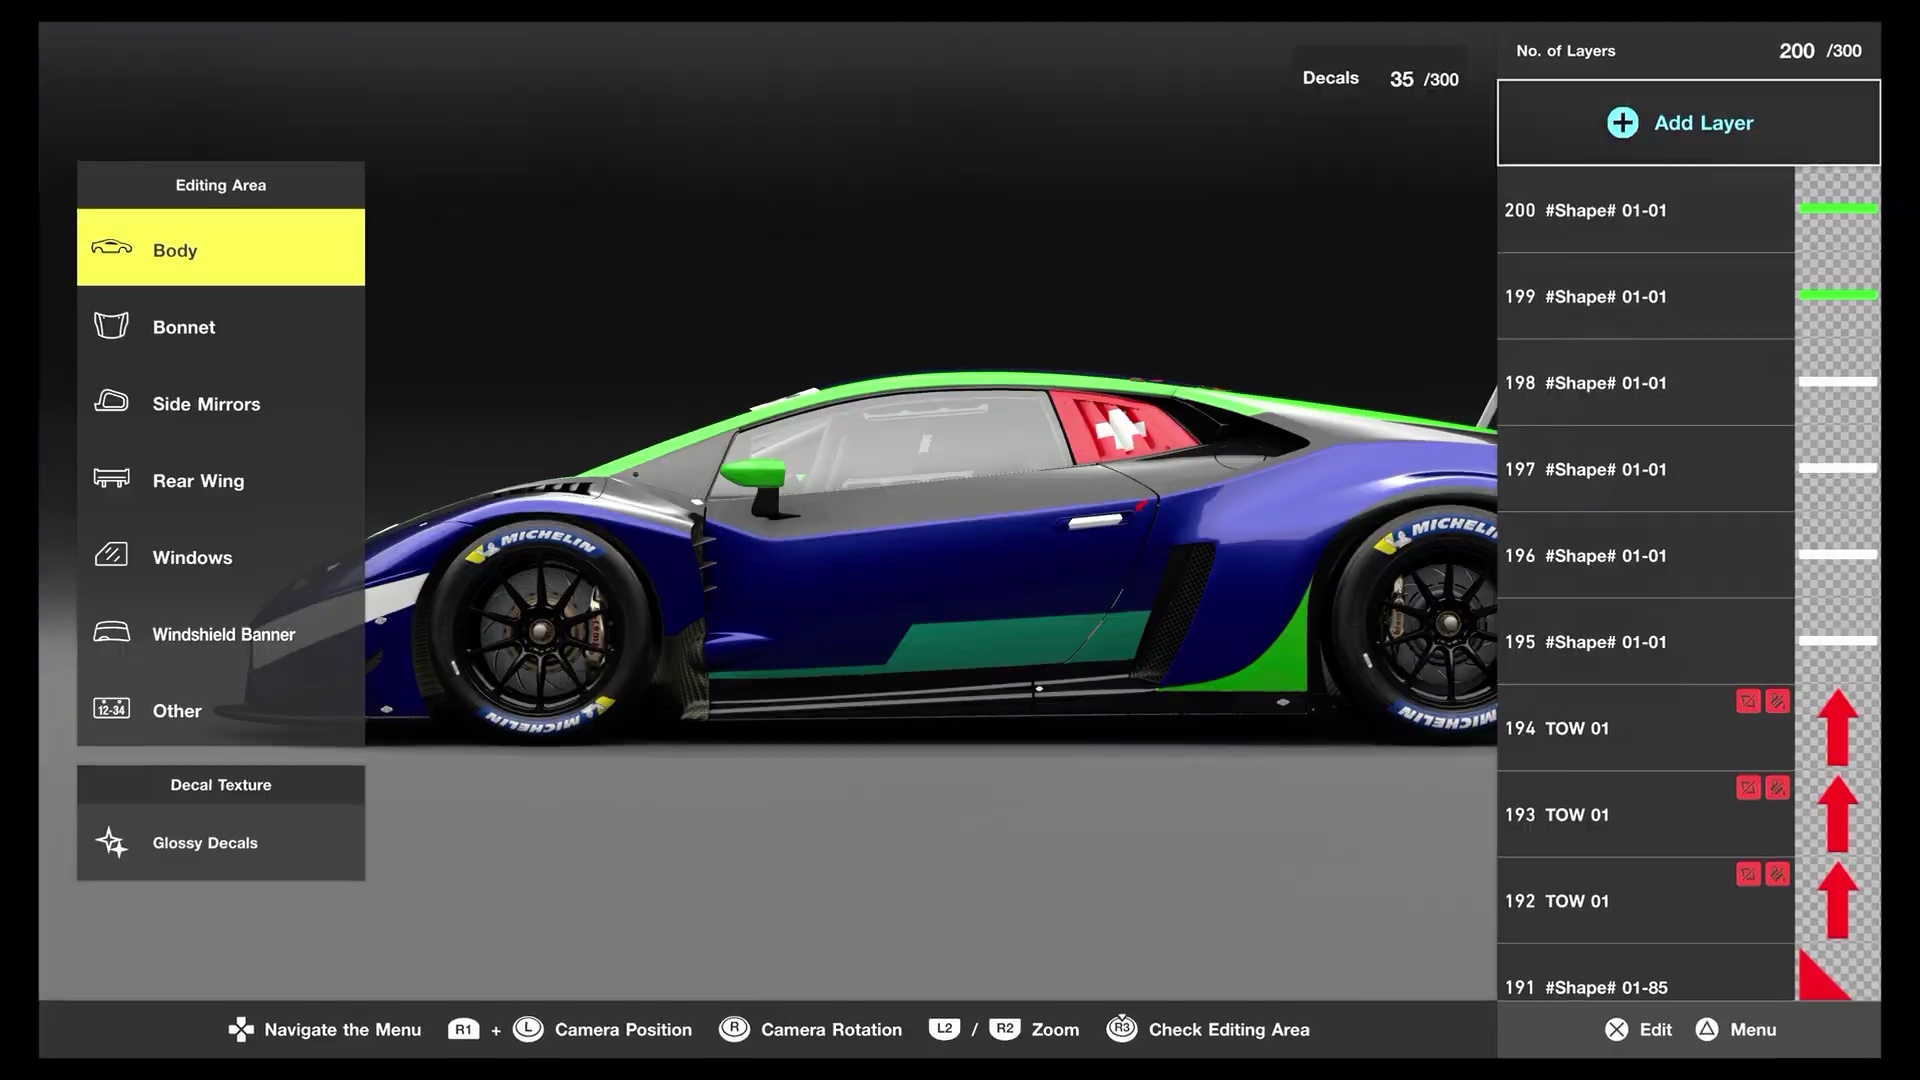 Gran Turismo 7's New Features Detailed: Used Cars, Body Upgrades